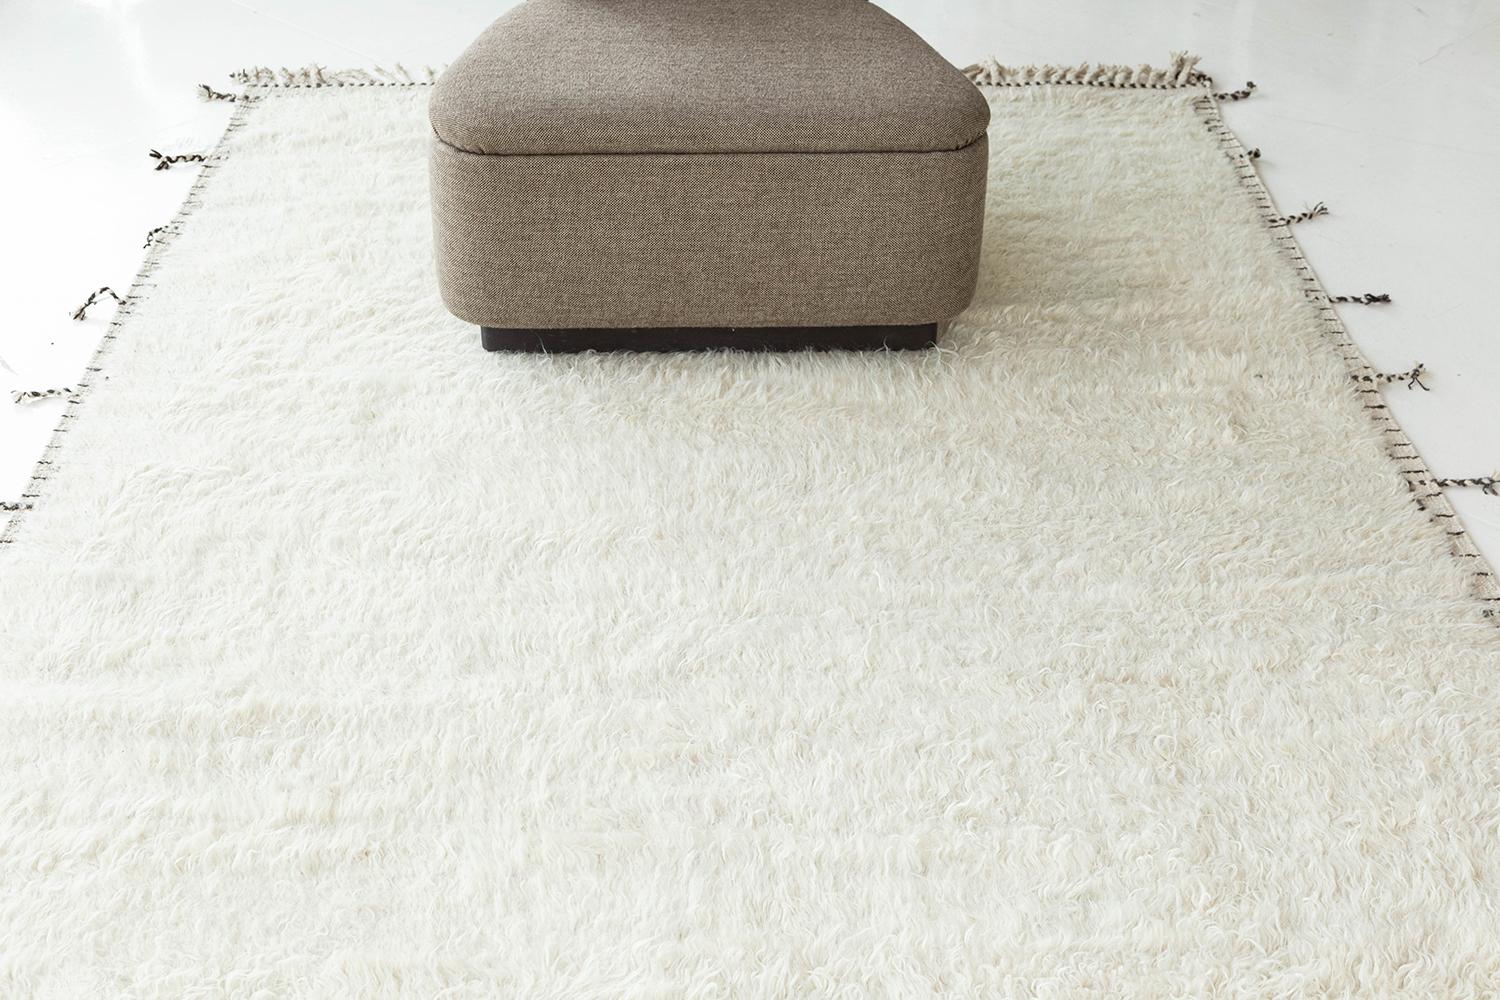 The perfect ivory color handwoven wool area rug to accommodate many spaces. This timeless design was built to withstand high amounts of foot traffic. The Haute Bohemian collection is designed in Los Angeles and named for the winds knitting together